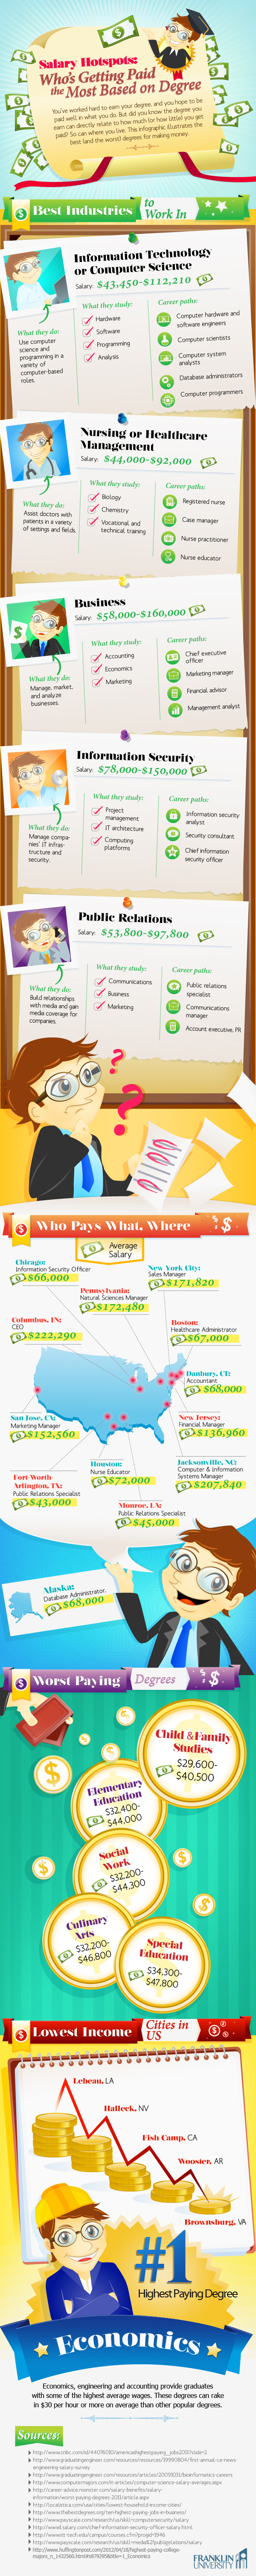 what-college-degrees-pay-the-most1